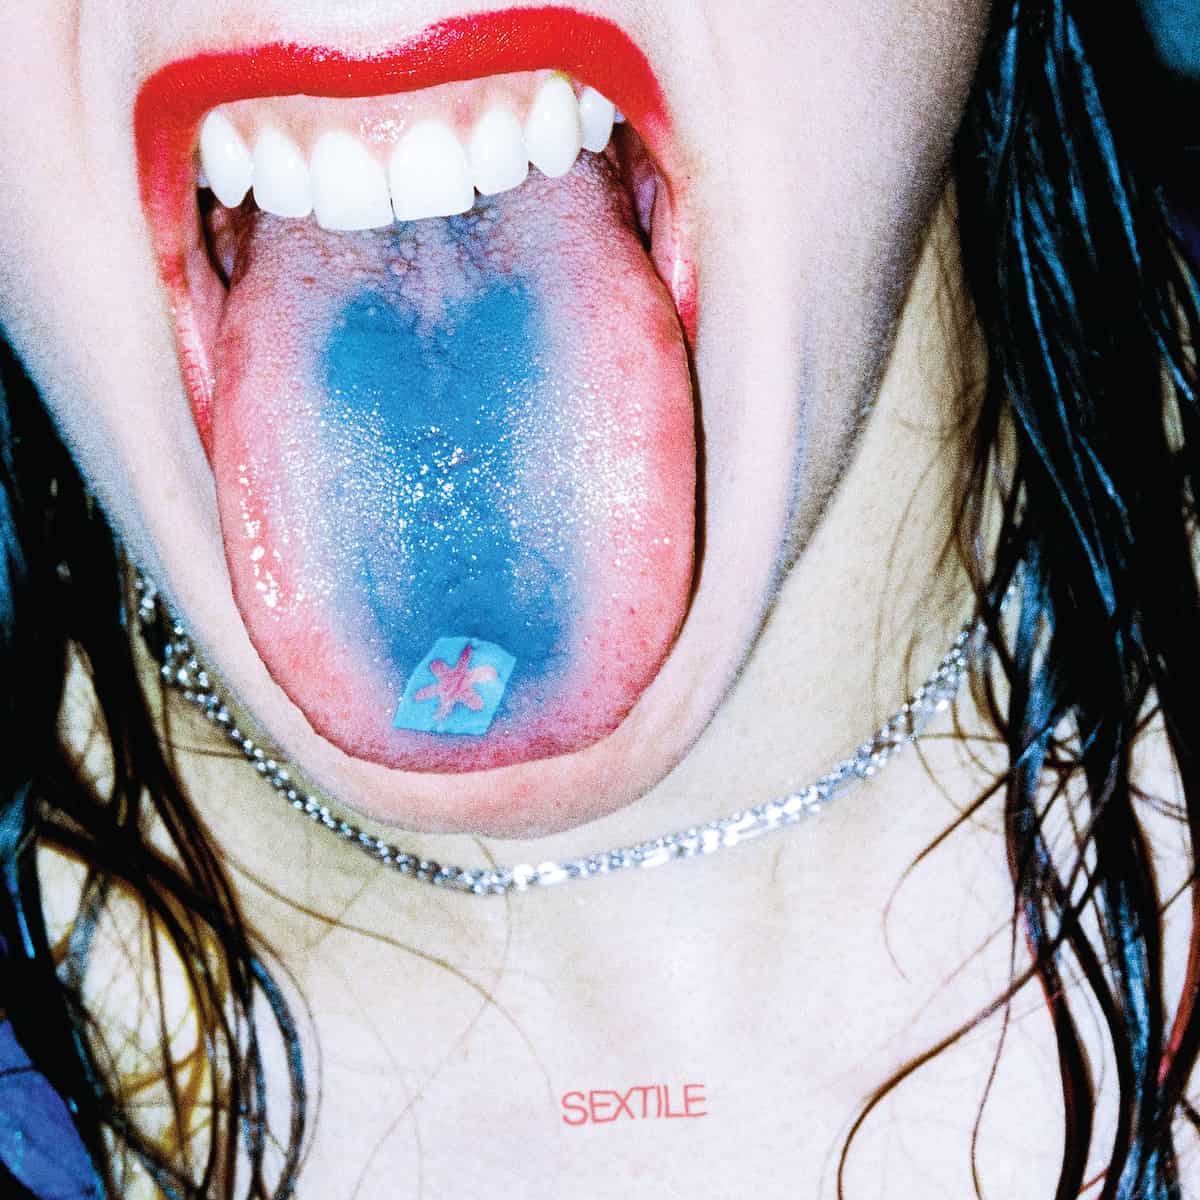 RECORD OF THE WEEK! Sextile – Push